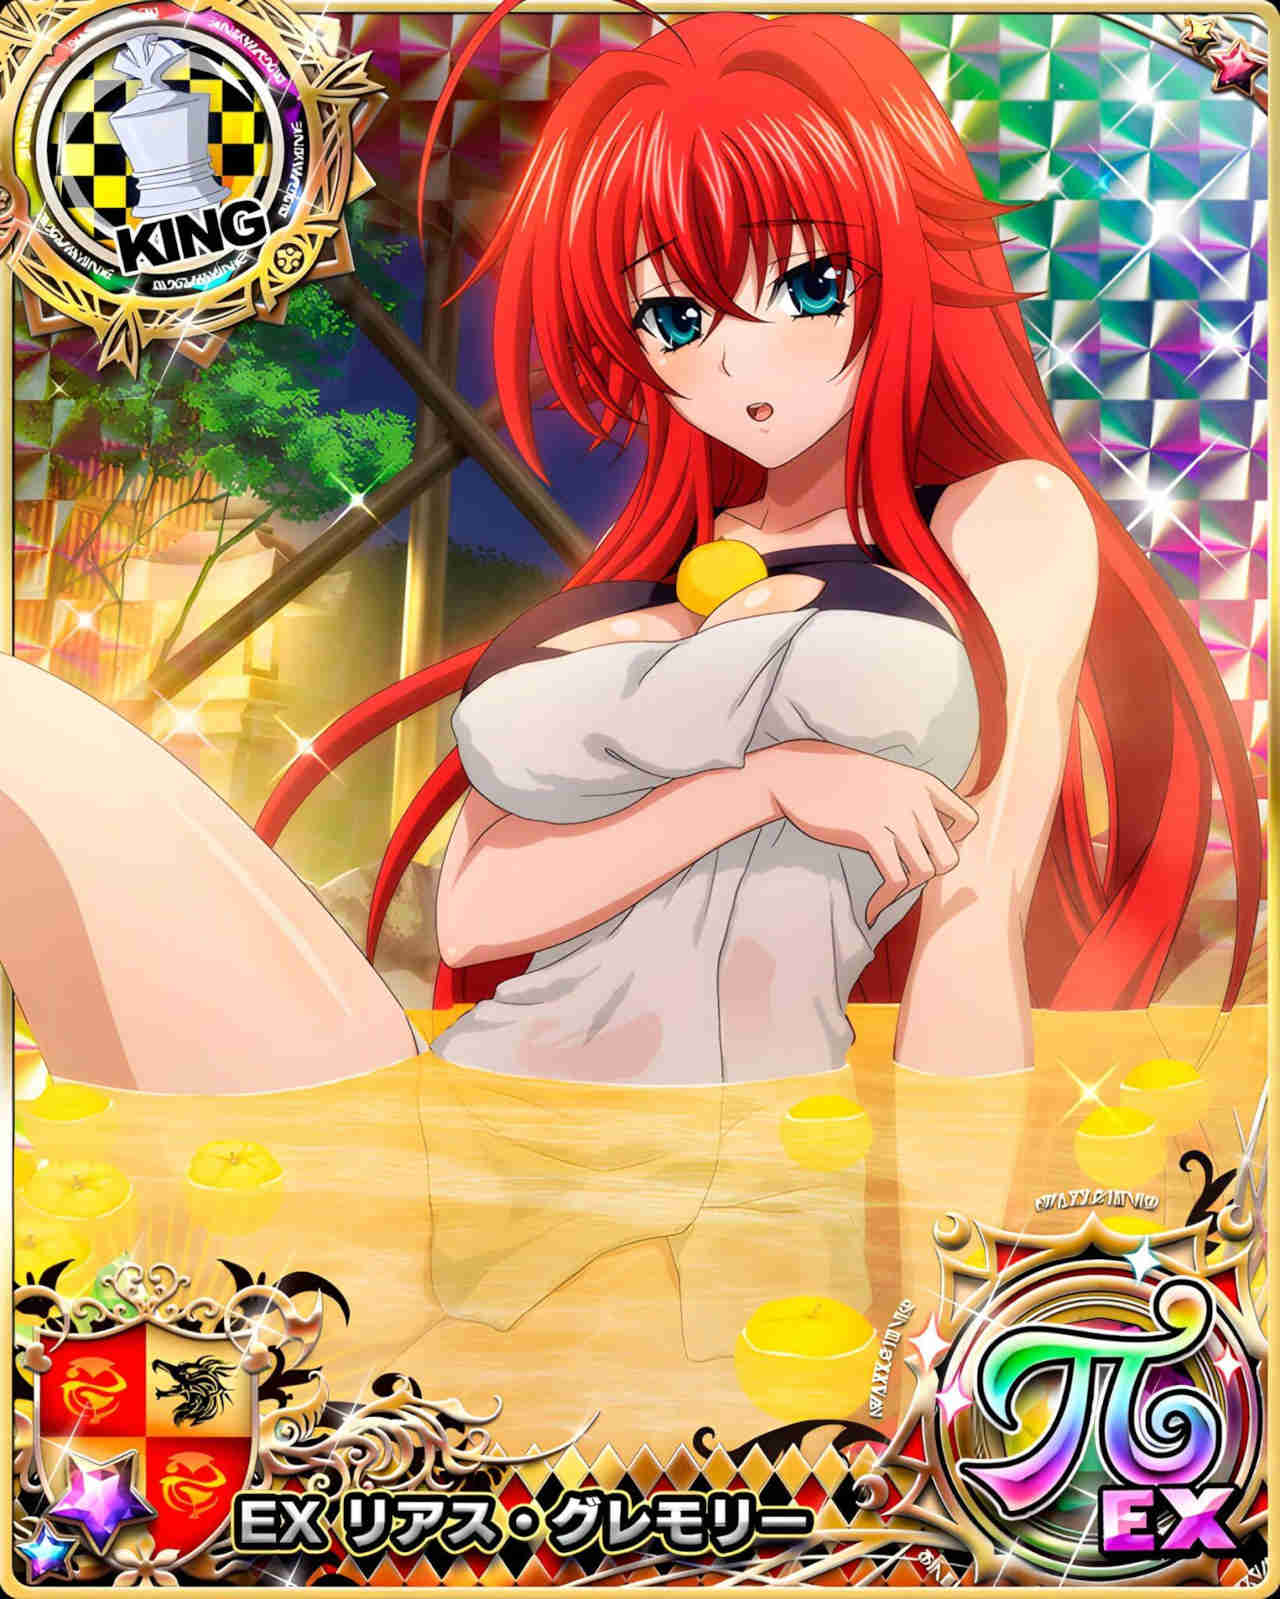 To take the chill off: The girls of High School DxD are now going to the hot springs